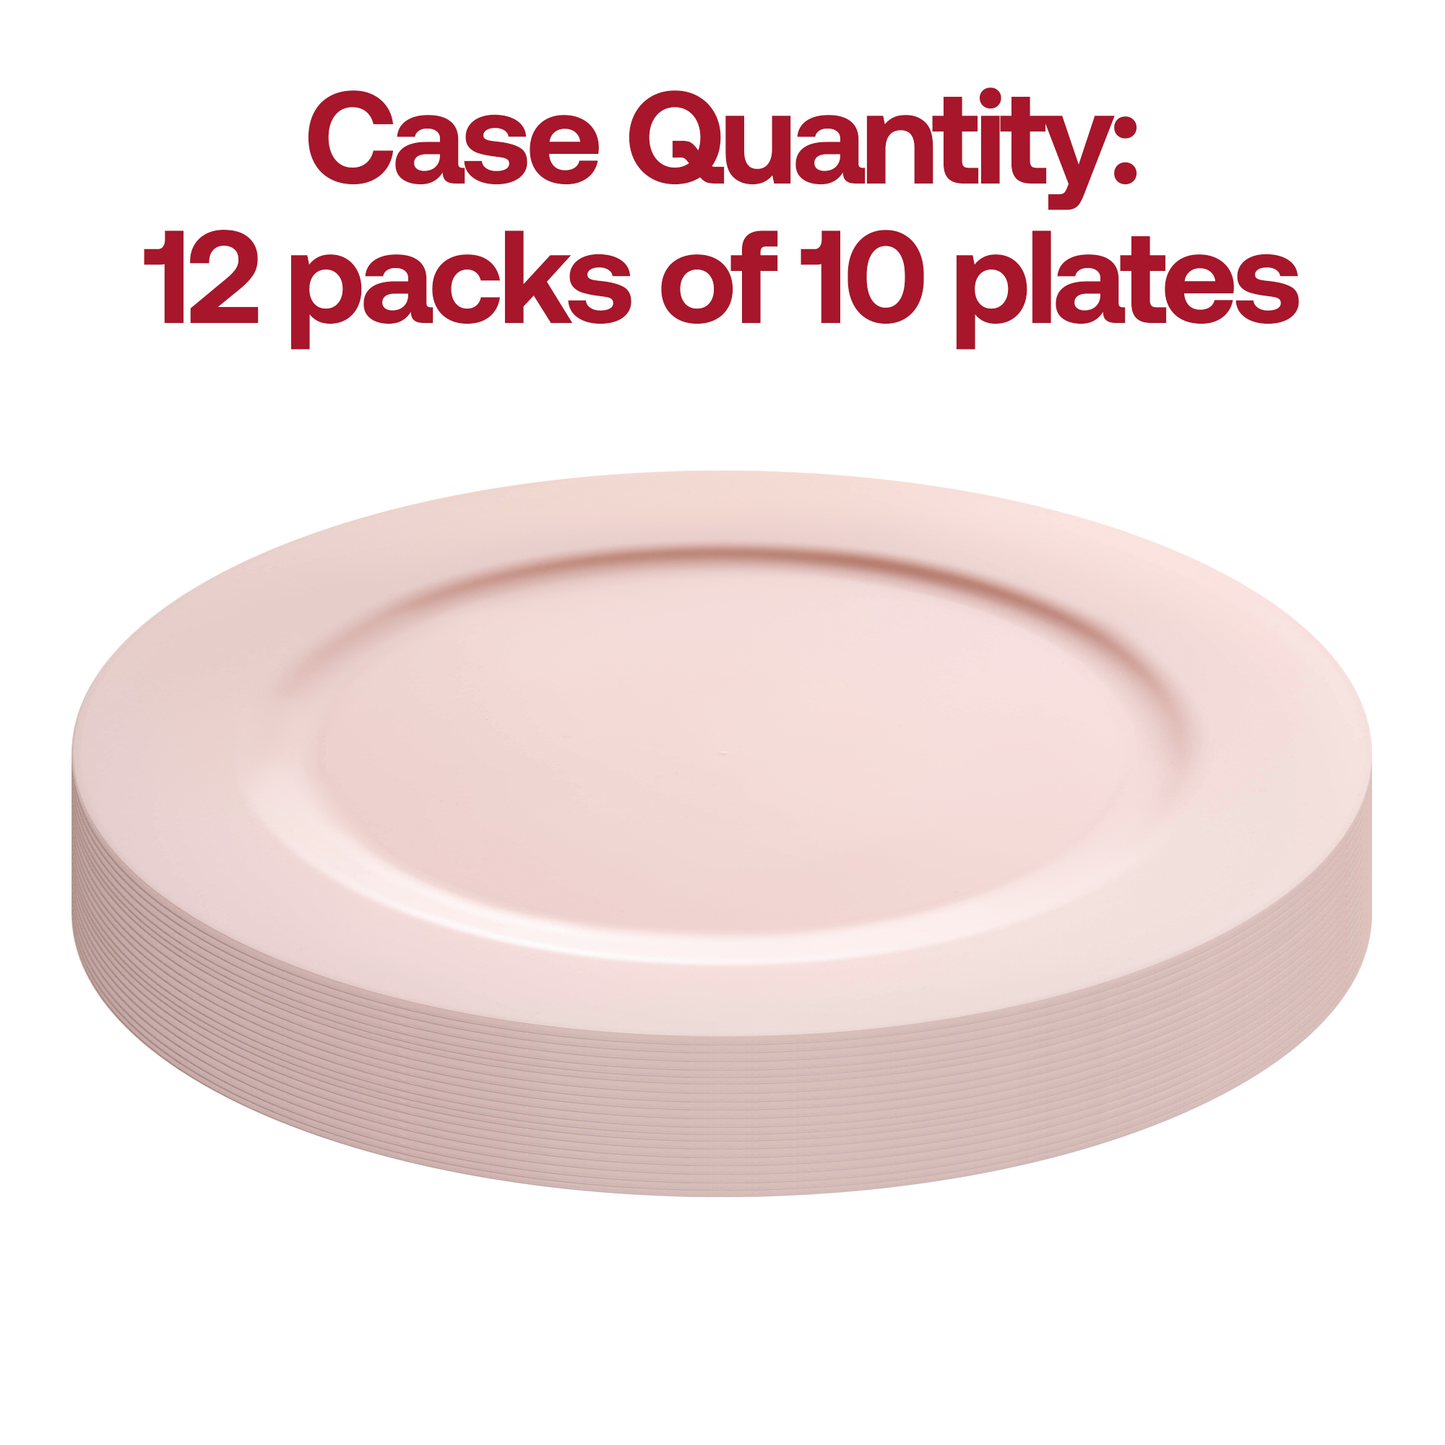 Matte Pink Round Disposable Plastic Appetizer/Salad Plates (7.5") Quantity | The Kaya Collection